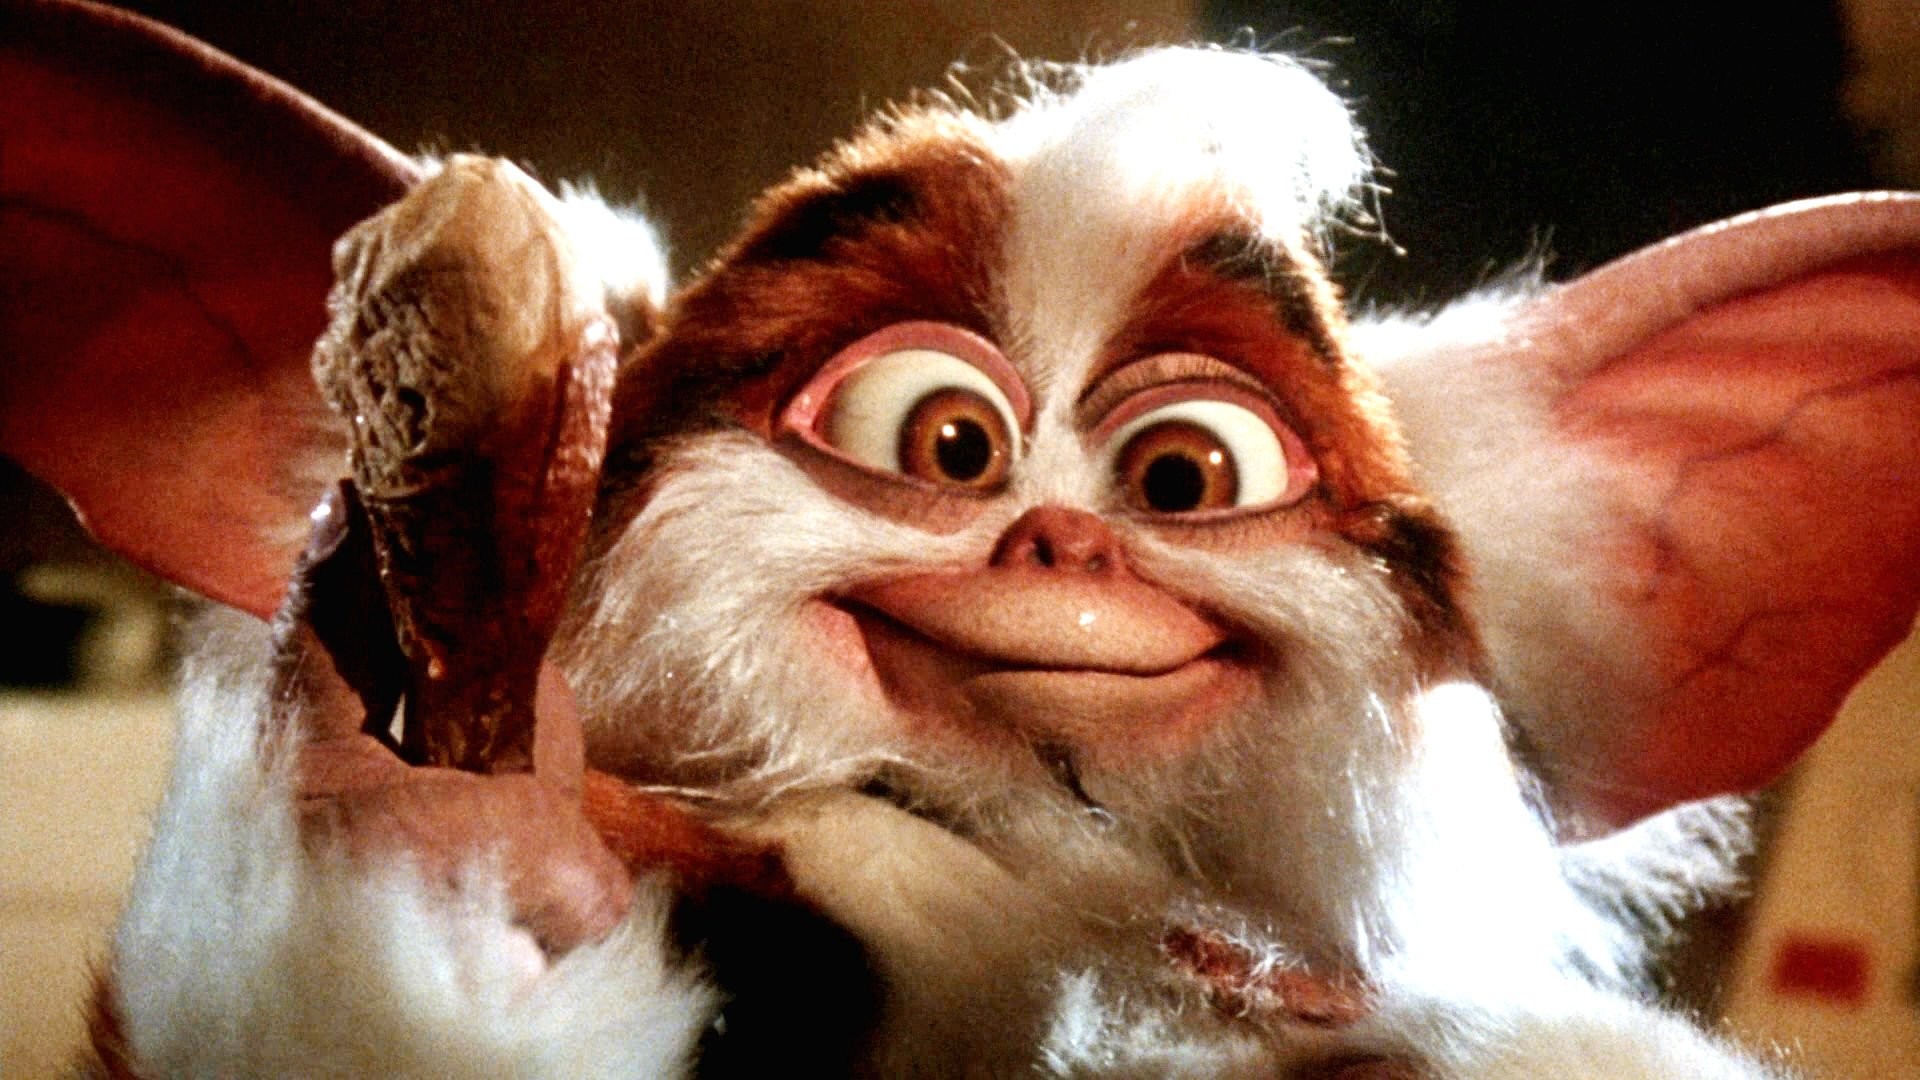 1920x1080 Wallpaper Gremlins, Gremlins, a mythical creature, gizmo, gizmo .